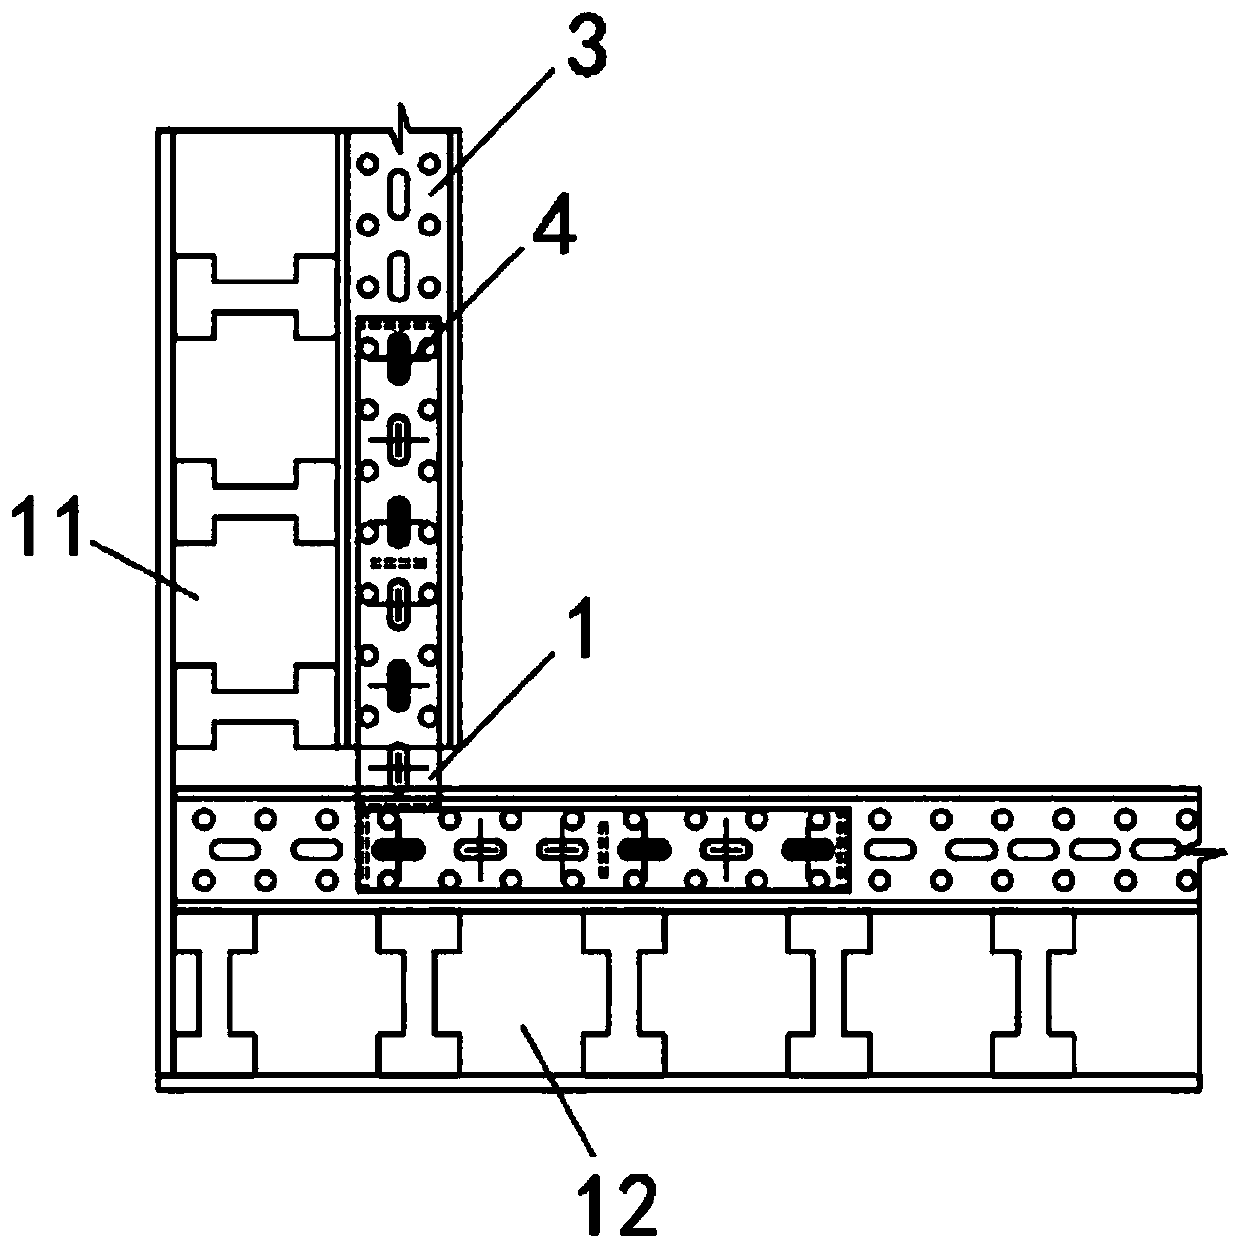 Inner corner reinforcing structure applied to super-thick vertical concrete structure formwork system